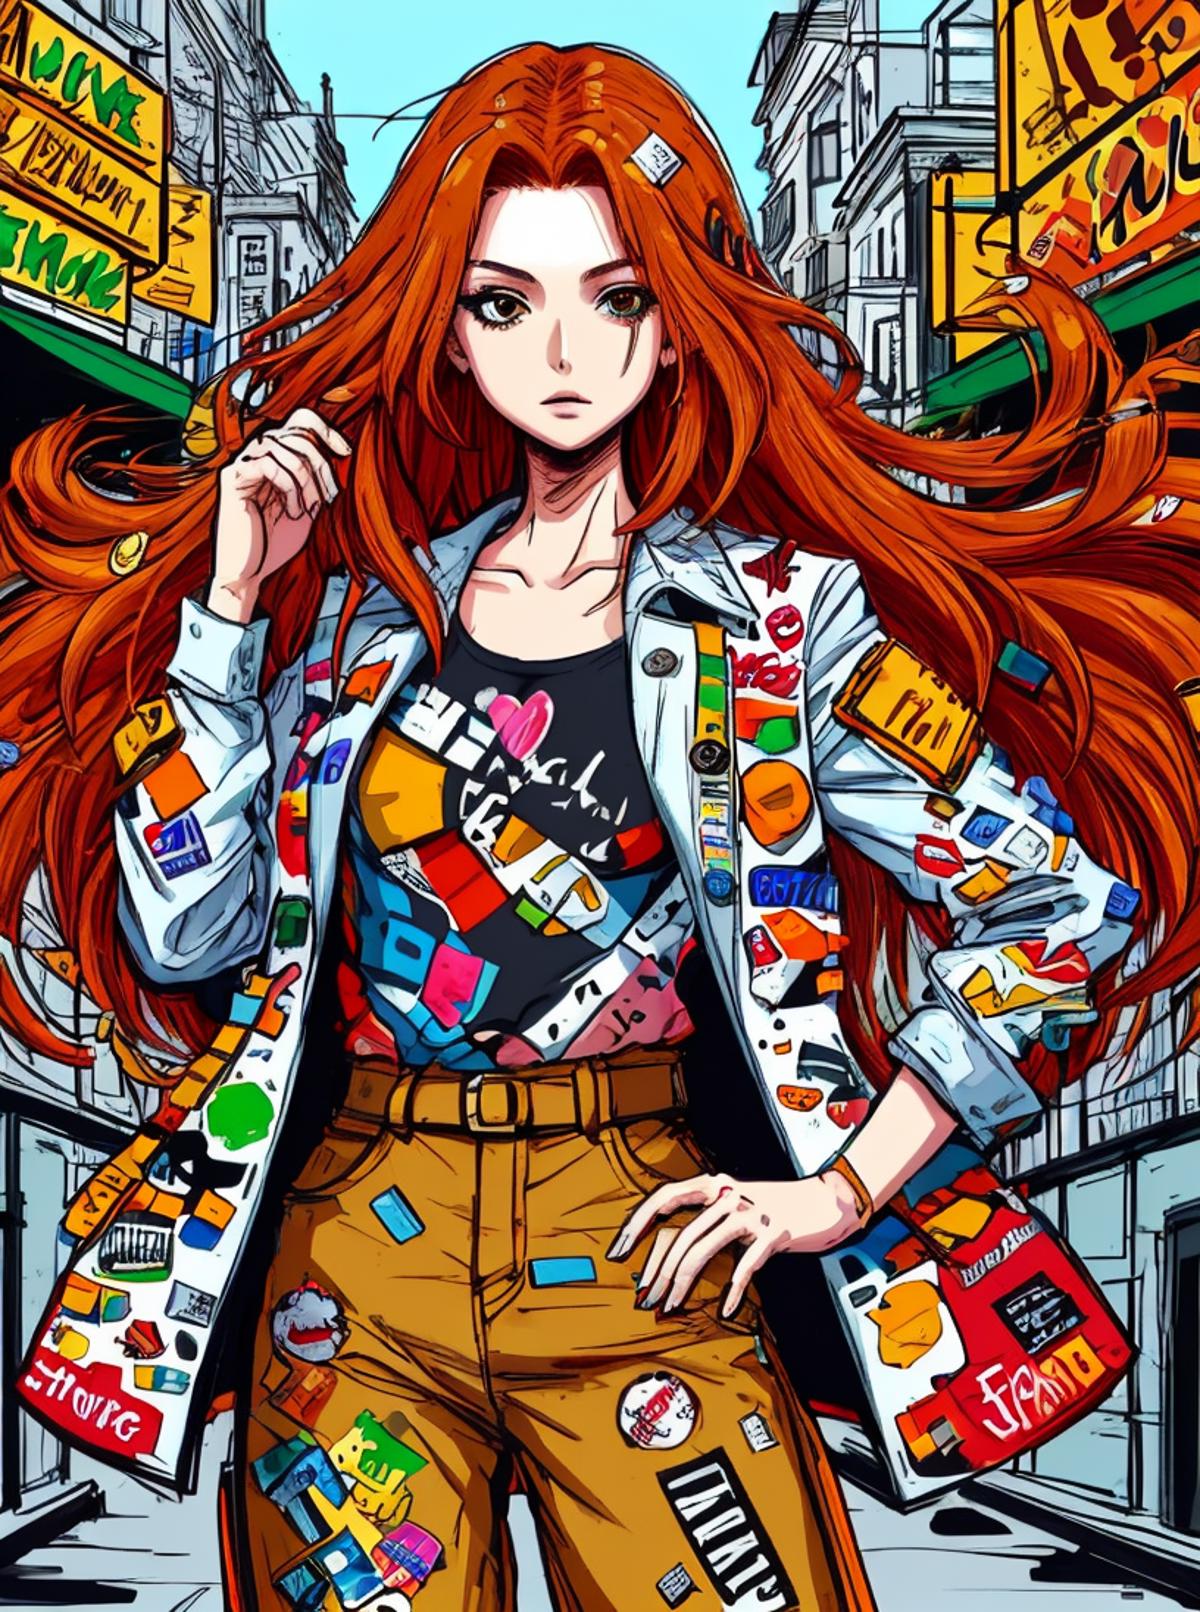 A woman wearing a coat with many stickers posing for a picture.